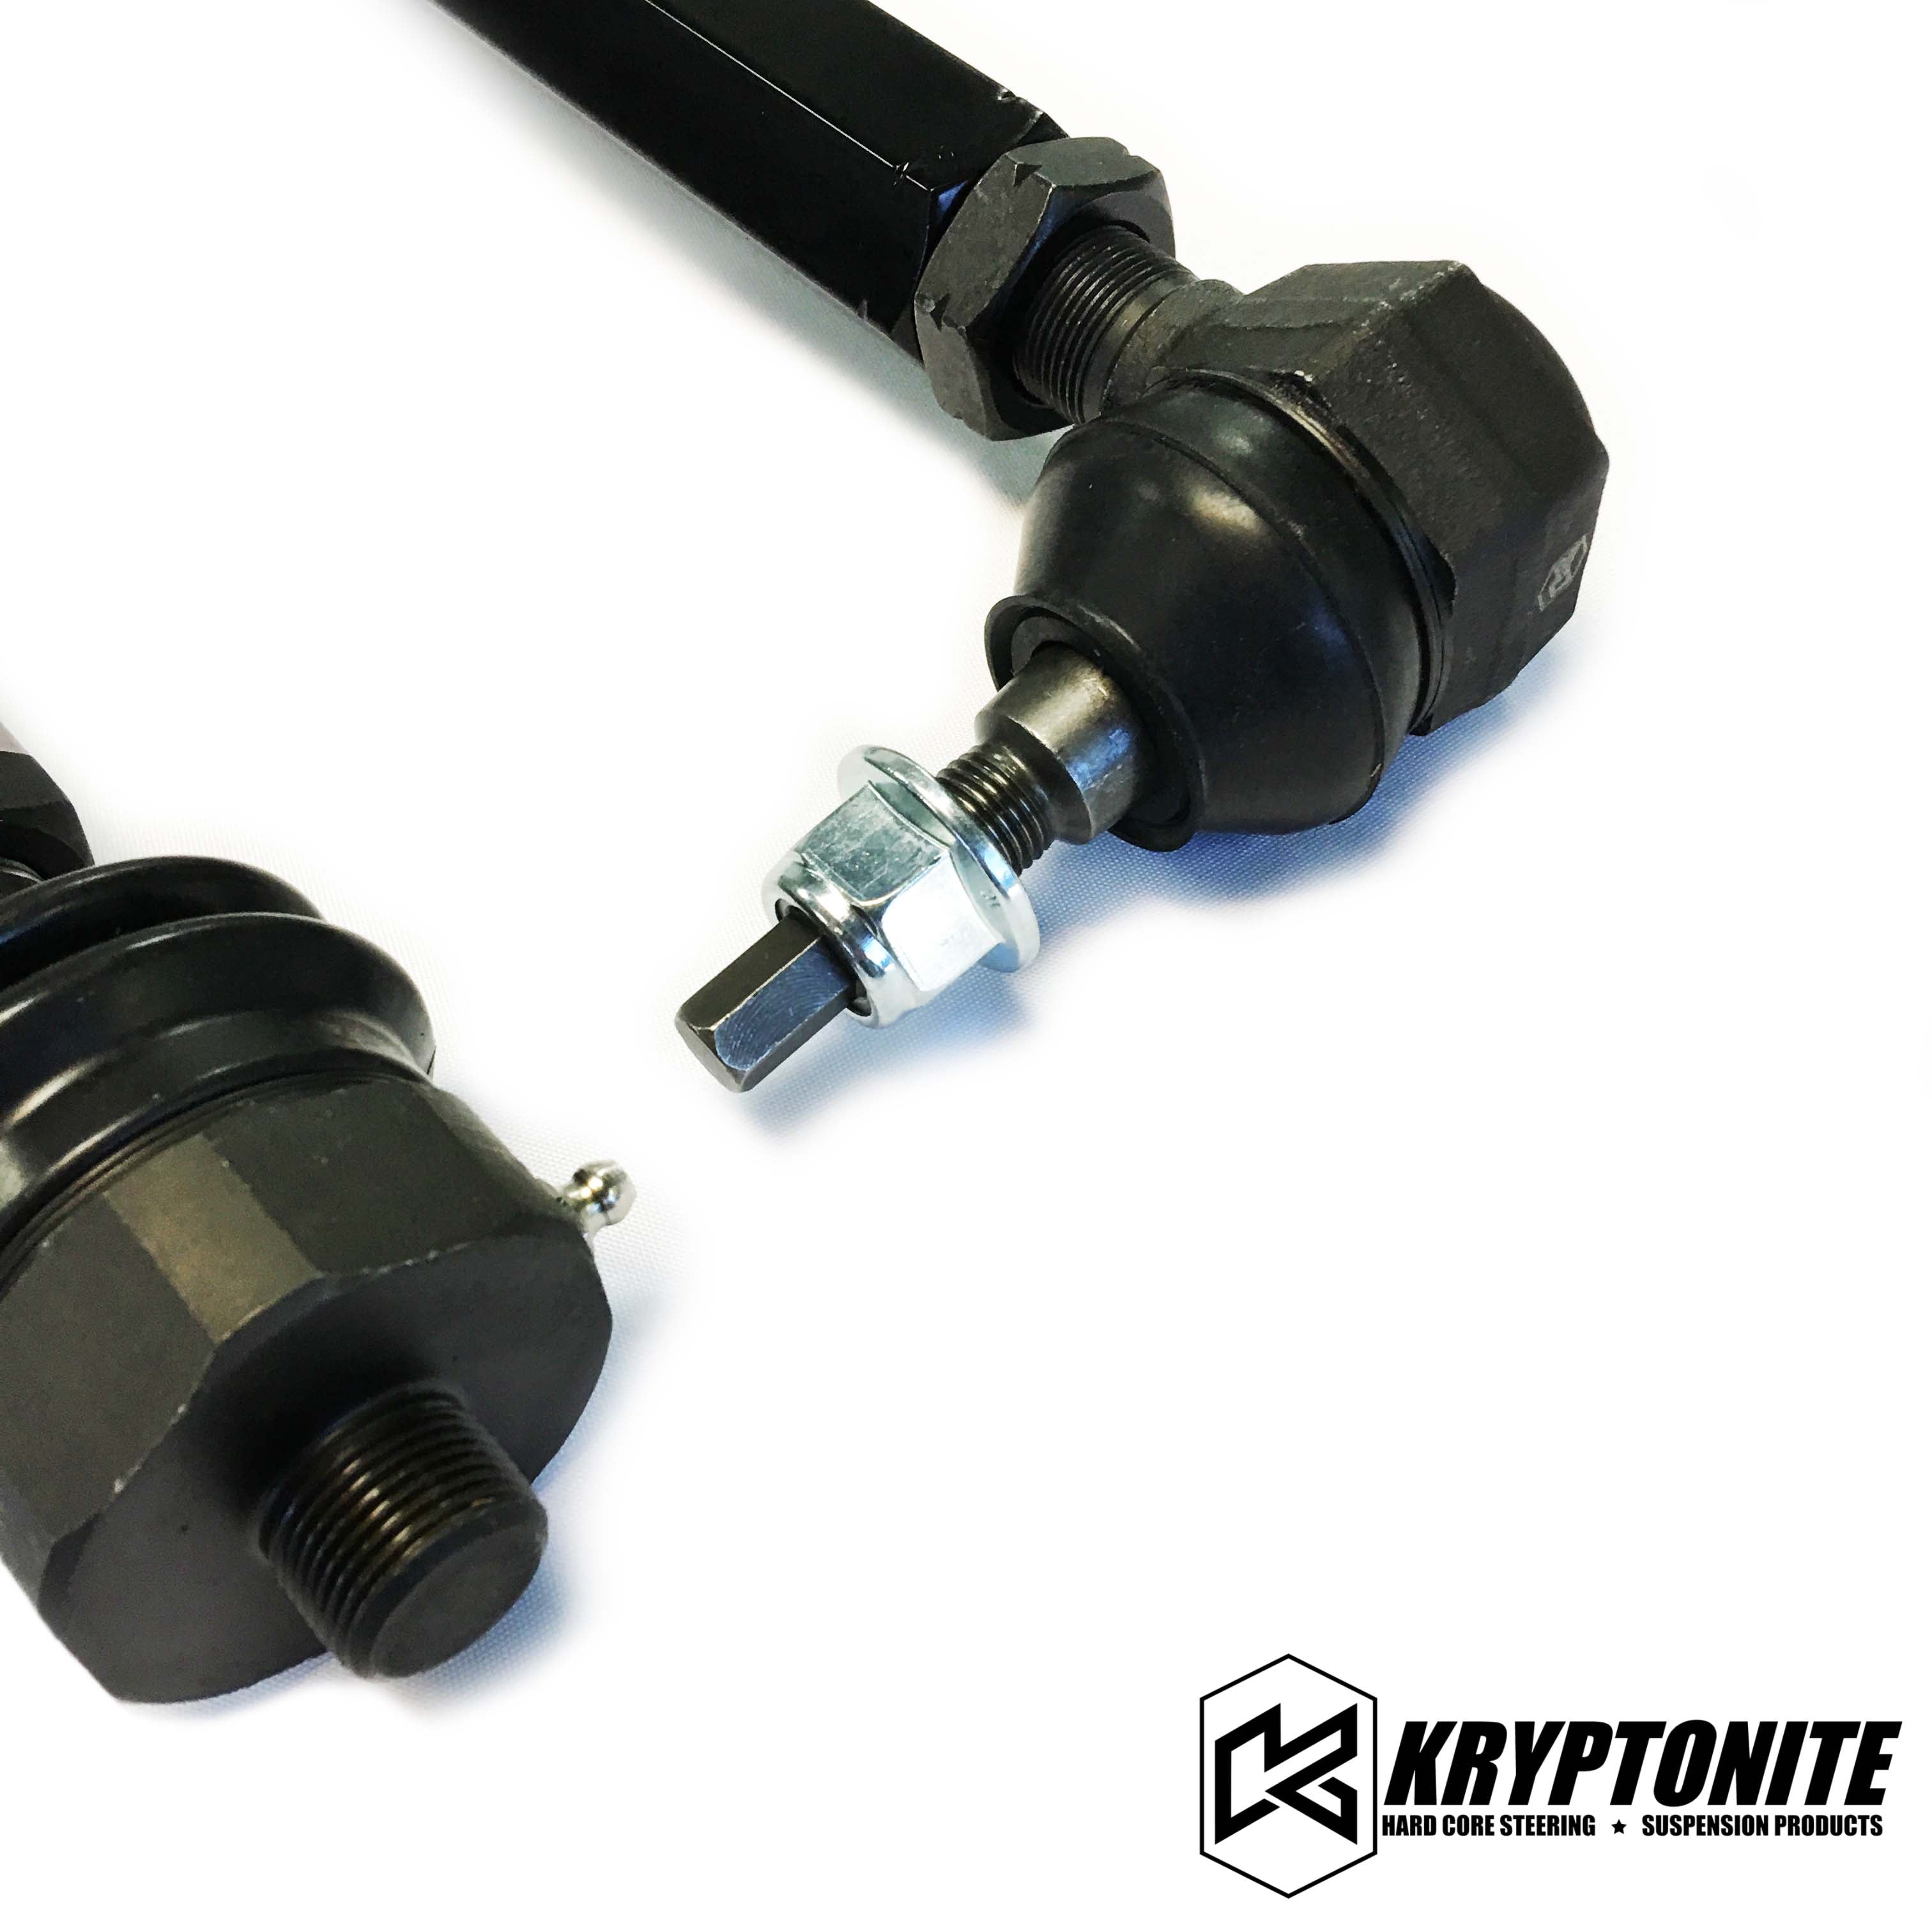 KRYPTONITE DEATH GRIP TIE RODS 2011-2019 (For Fabtech RTS Lift Kits)